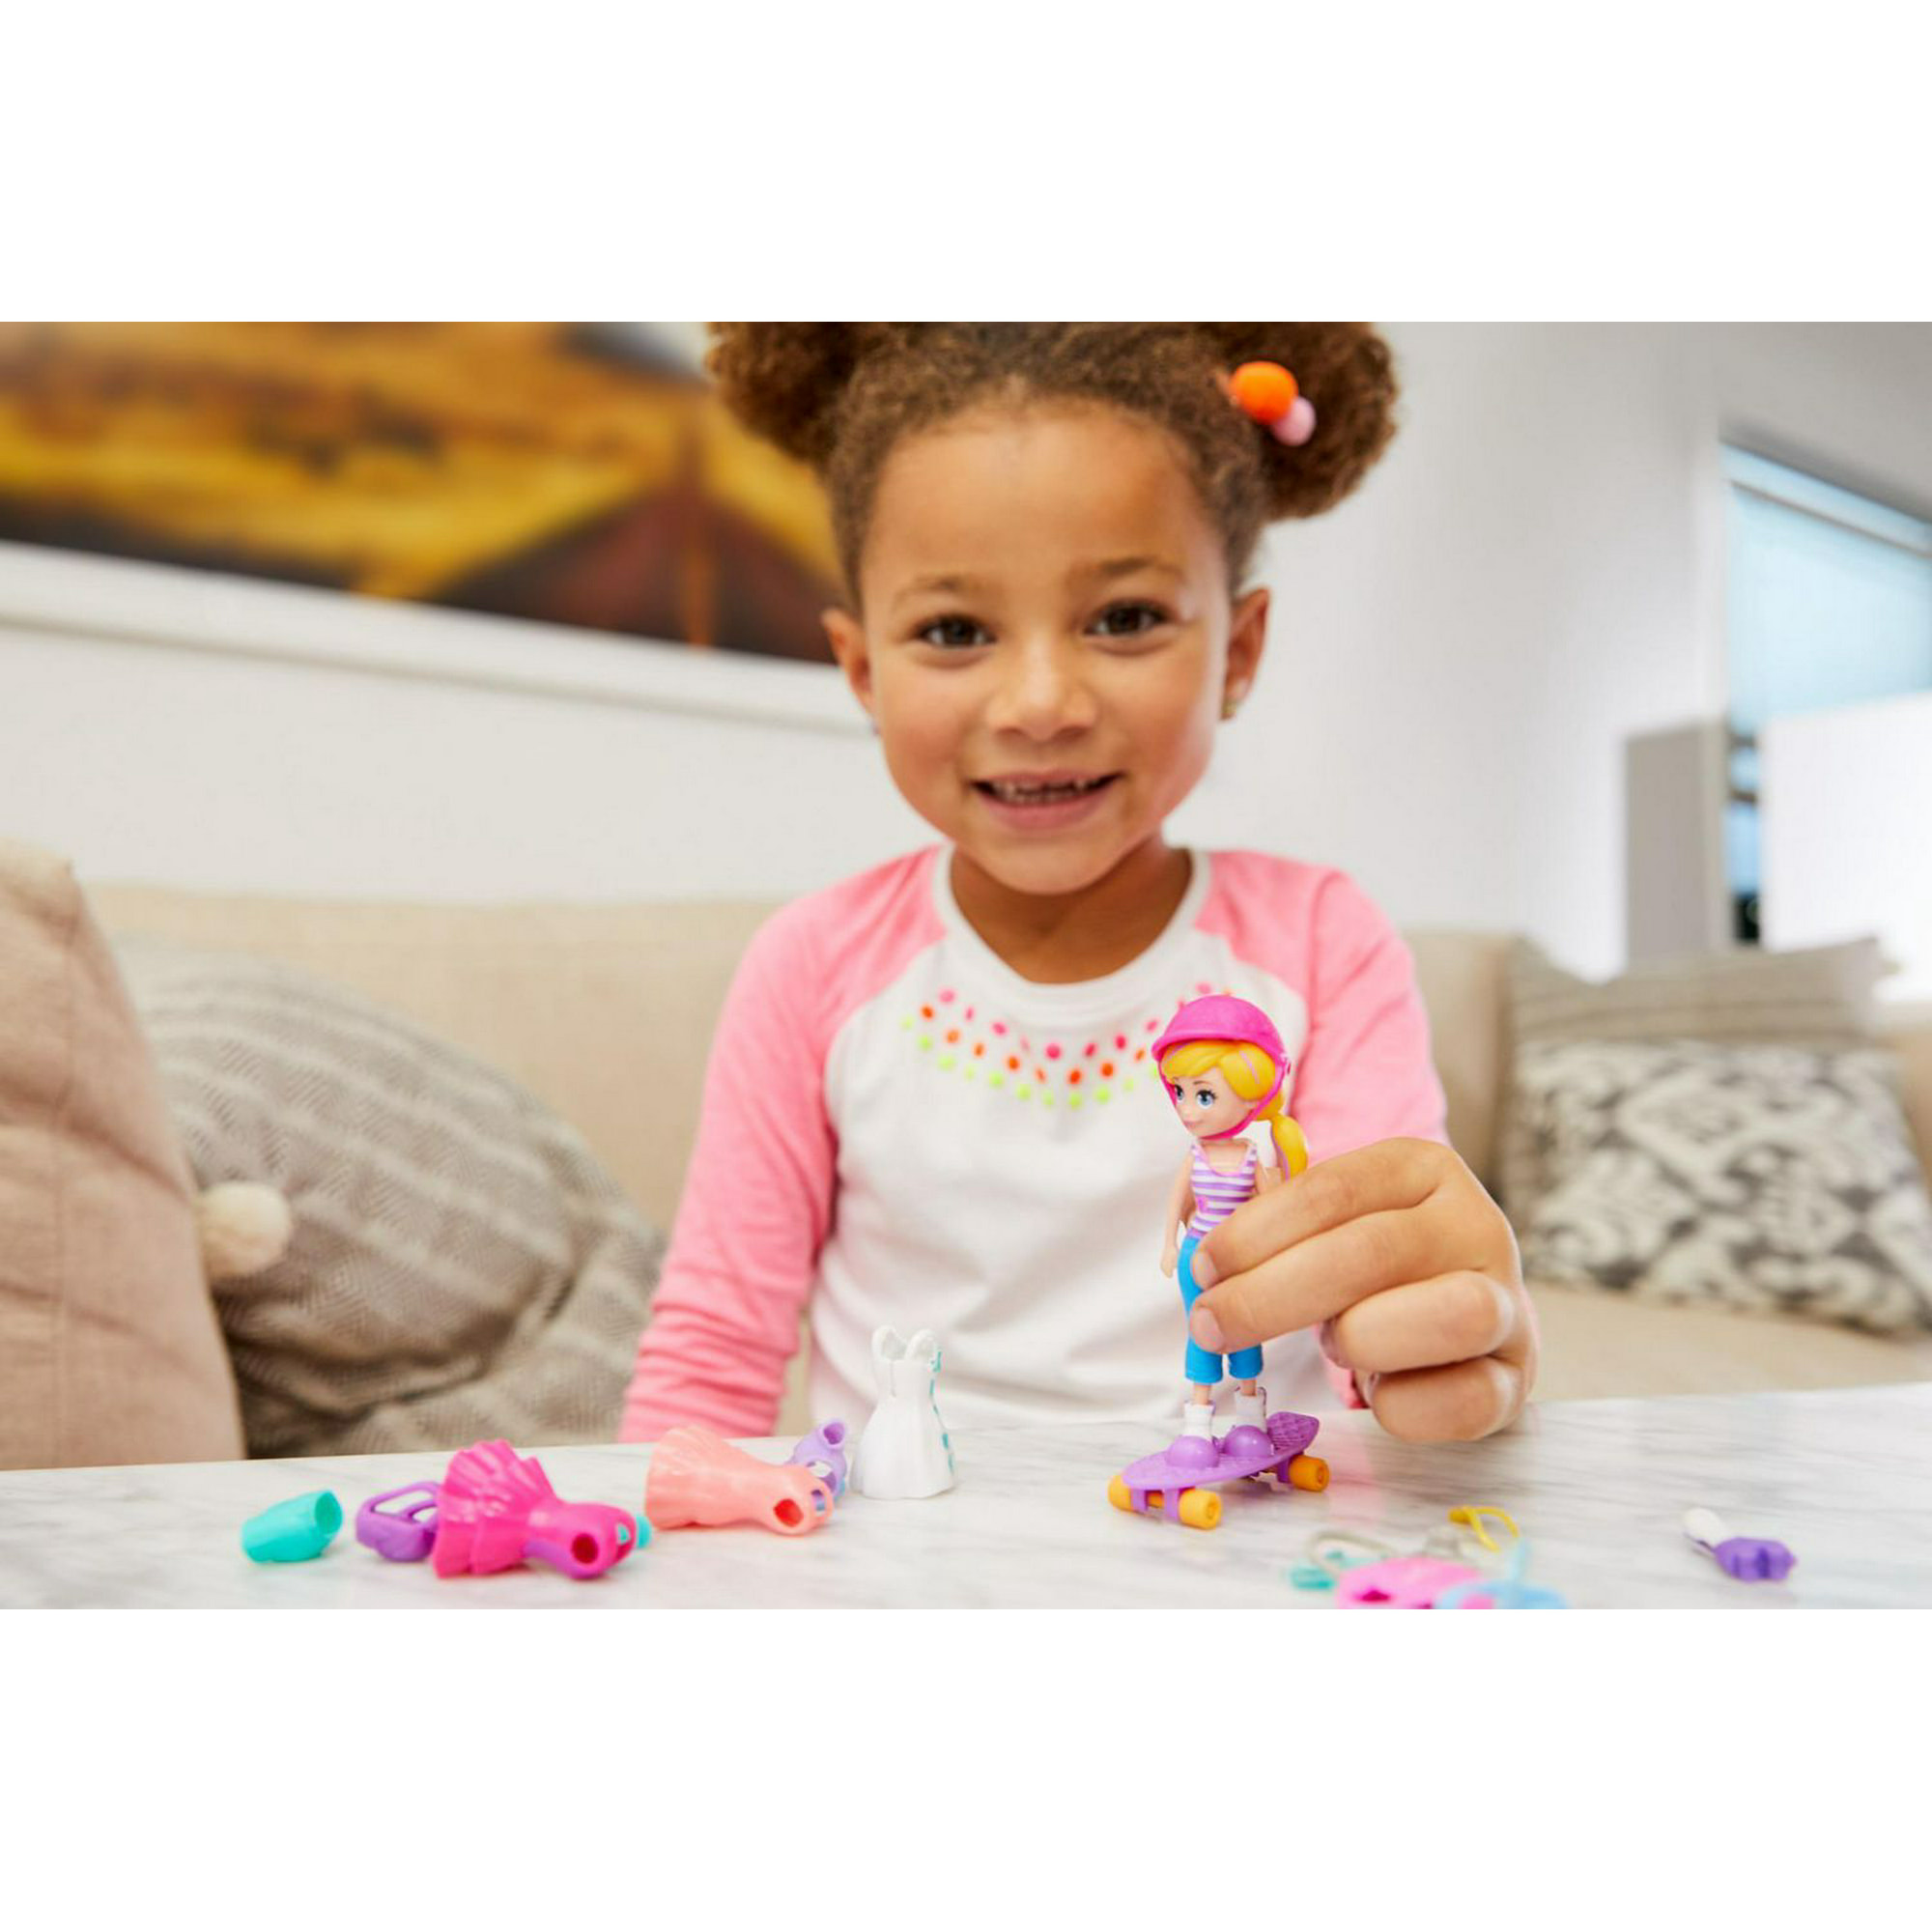  Polly Pocket Super Sporty Pack with Polly & Lila Dolls and over  35 Fashions & Sporting Accessories : Toys & Games